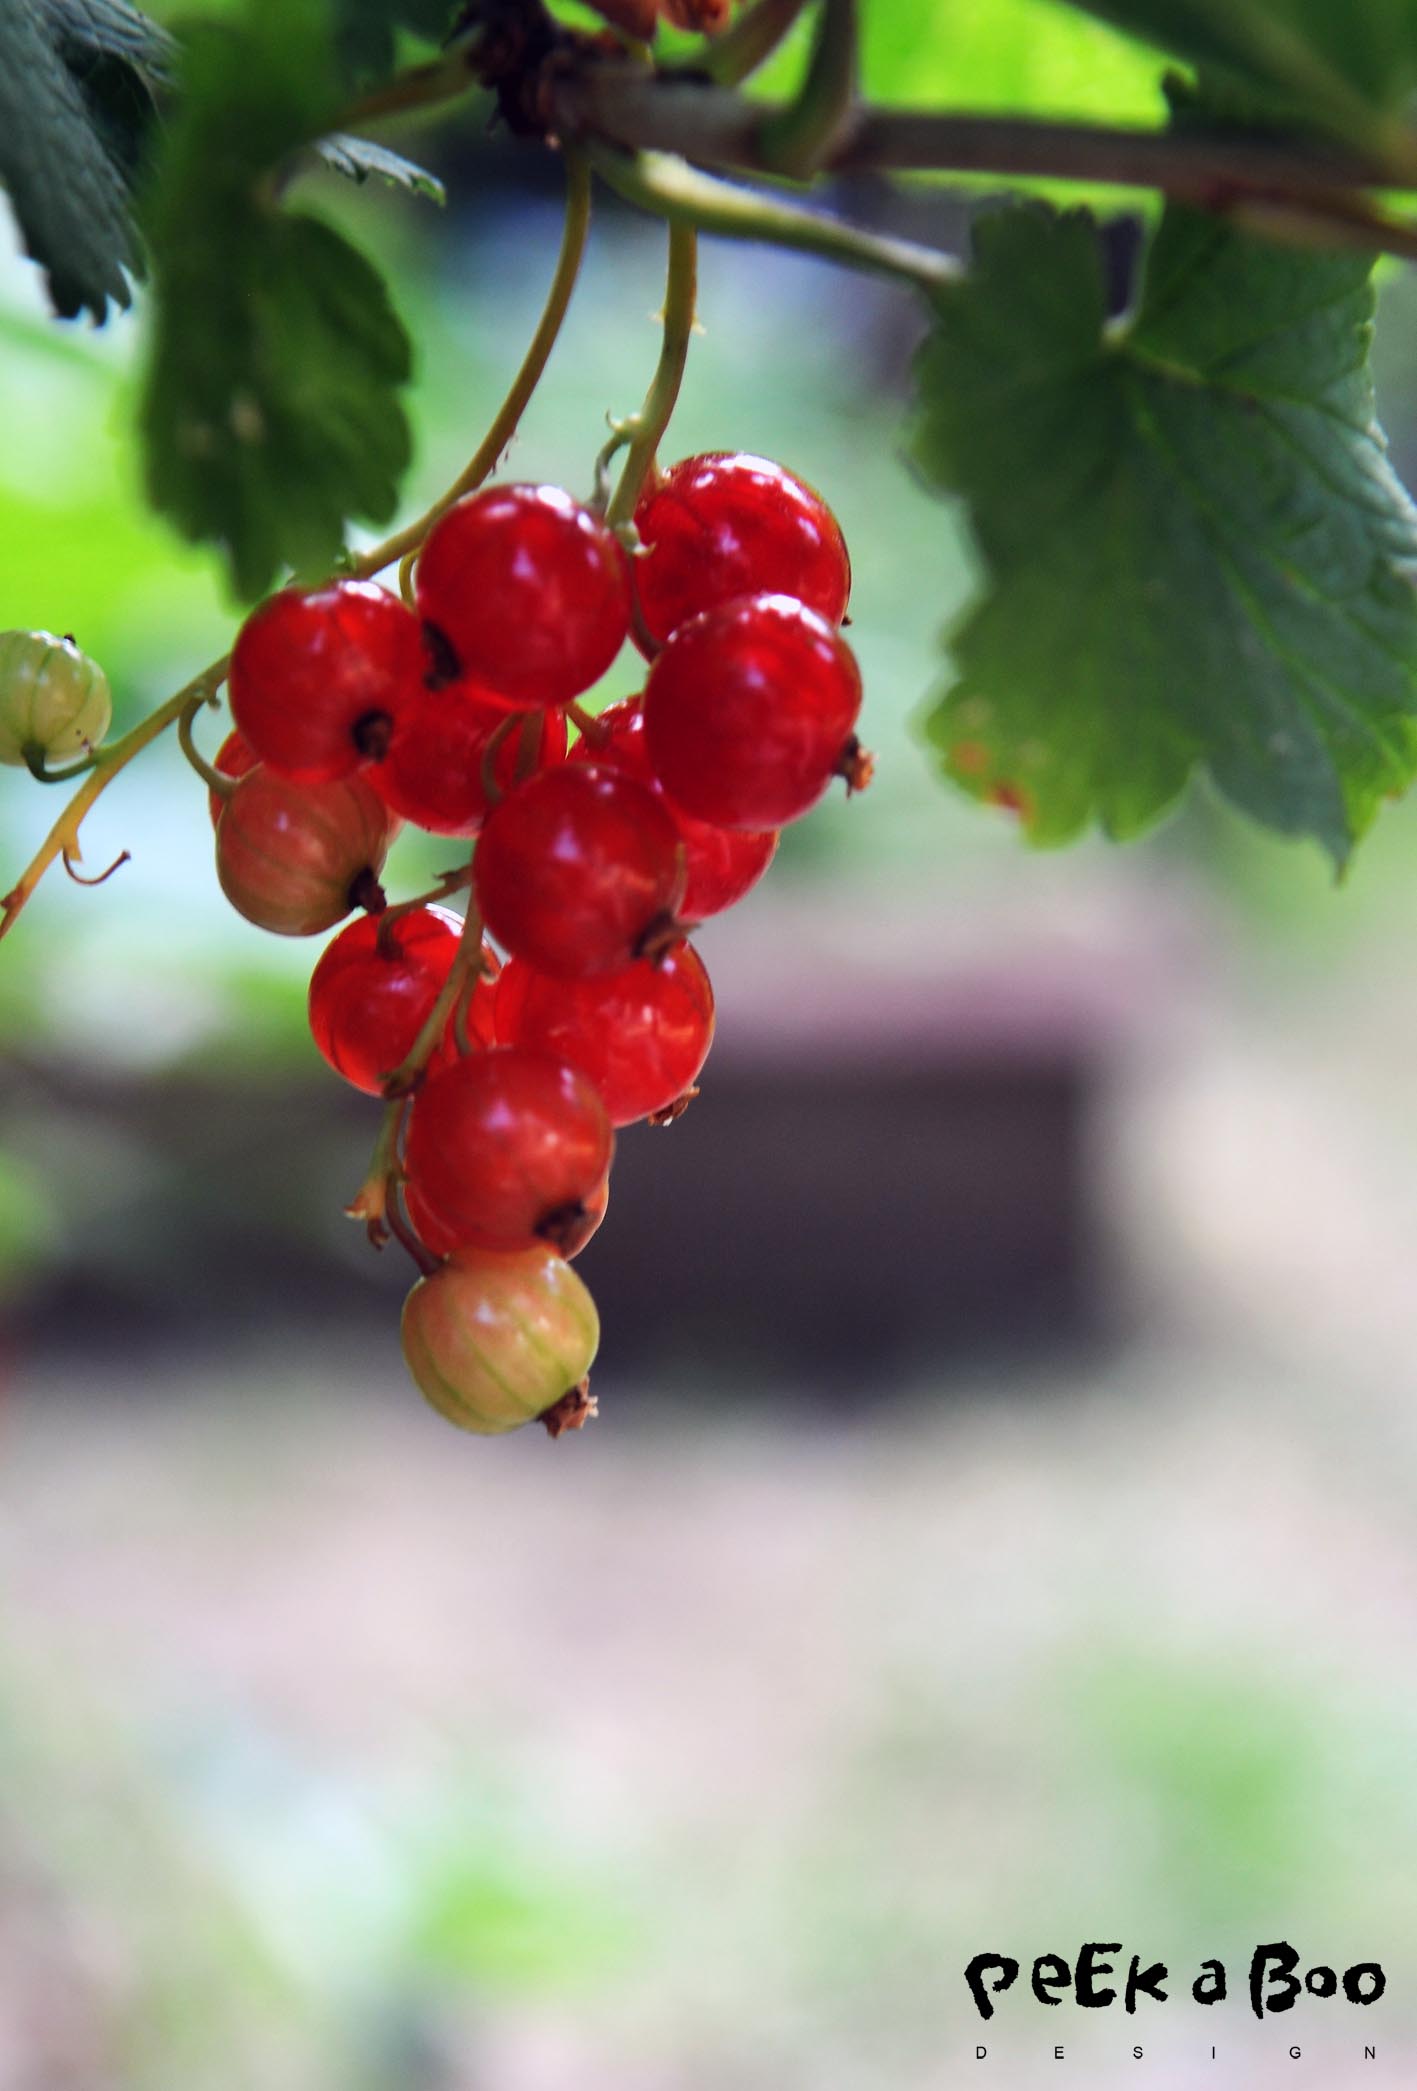 Lovely red currant berries, ready to be picked.